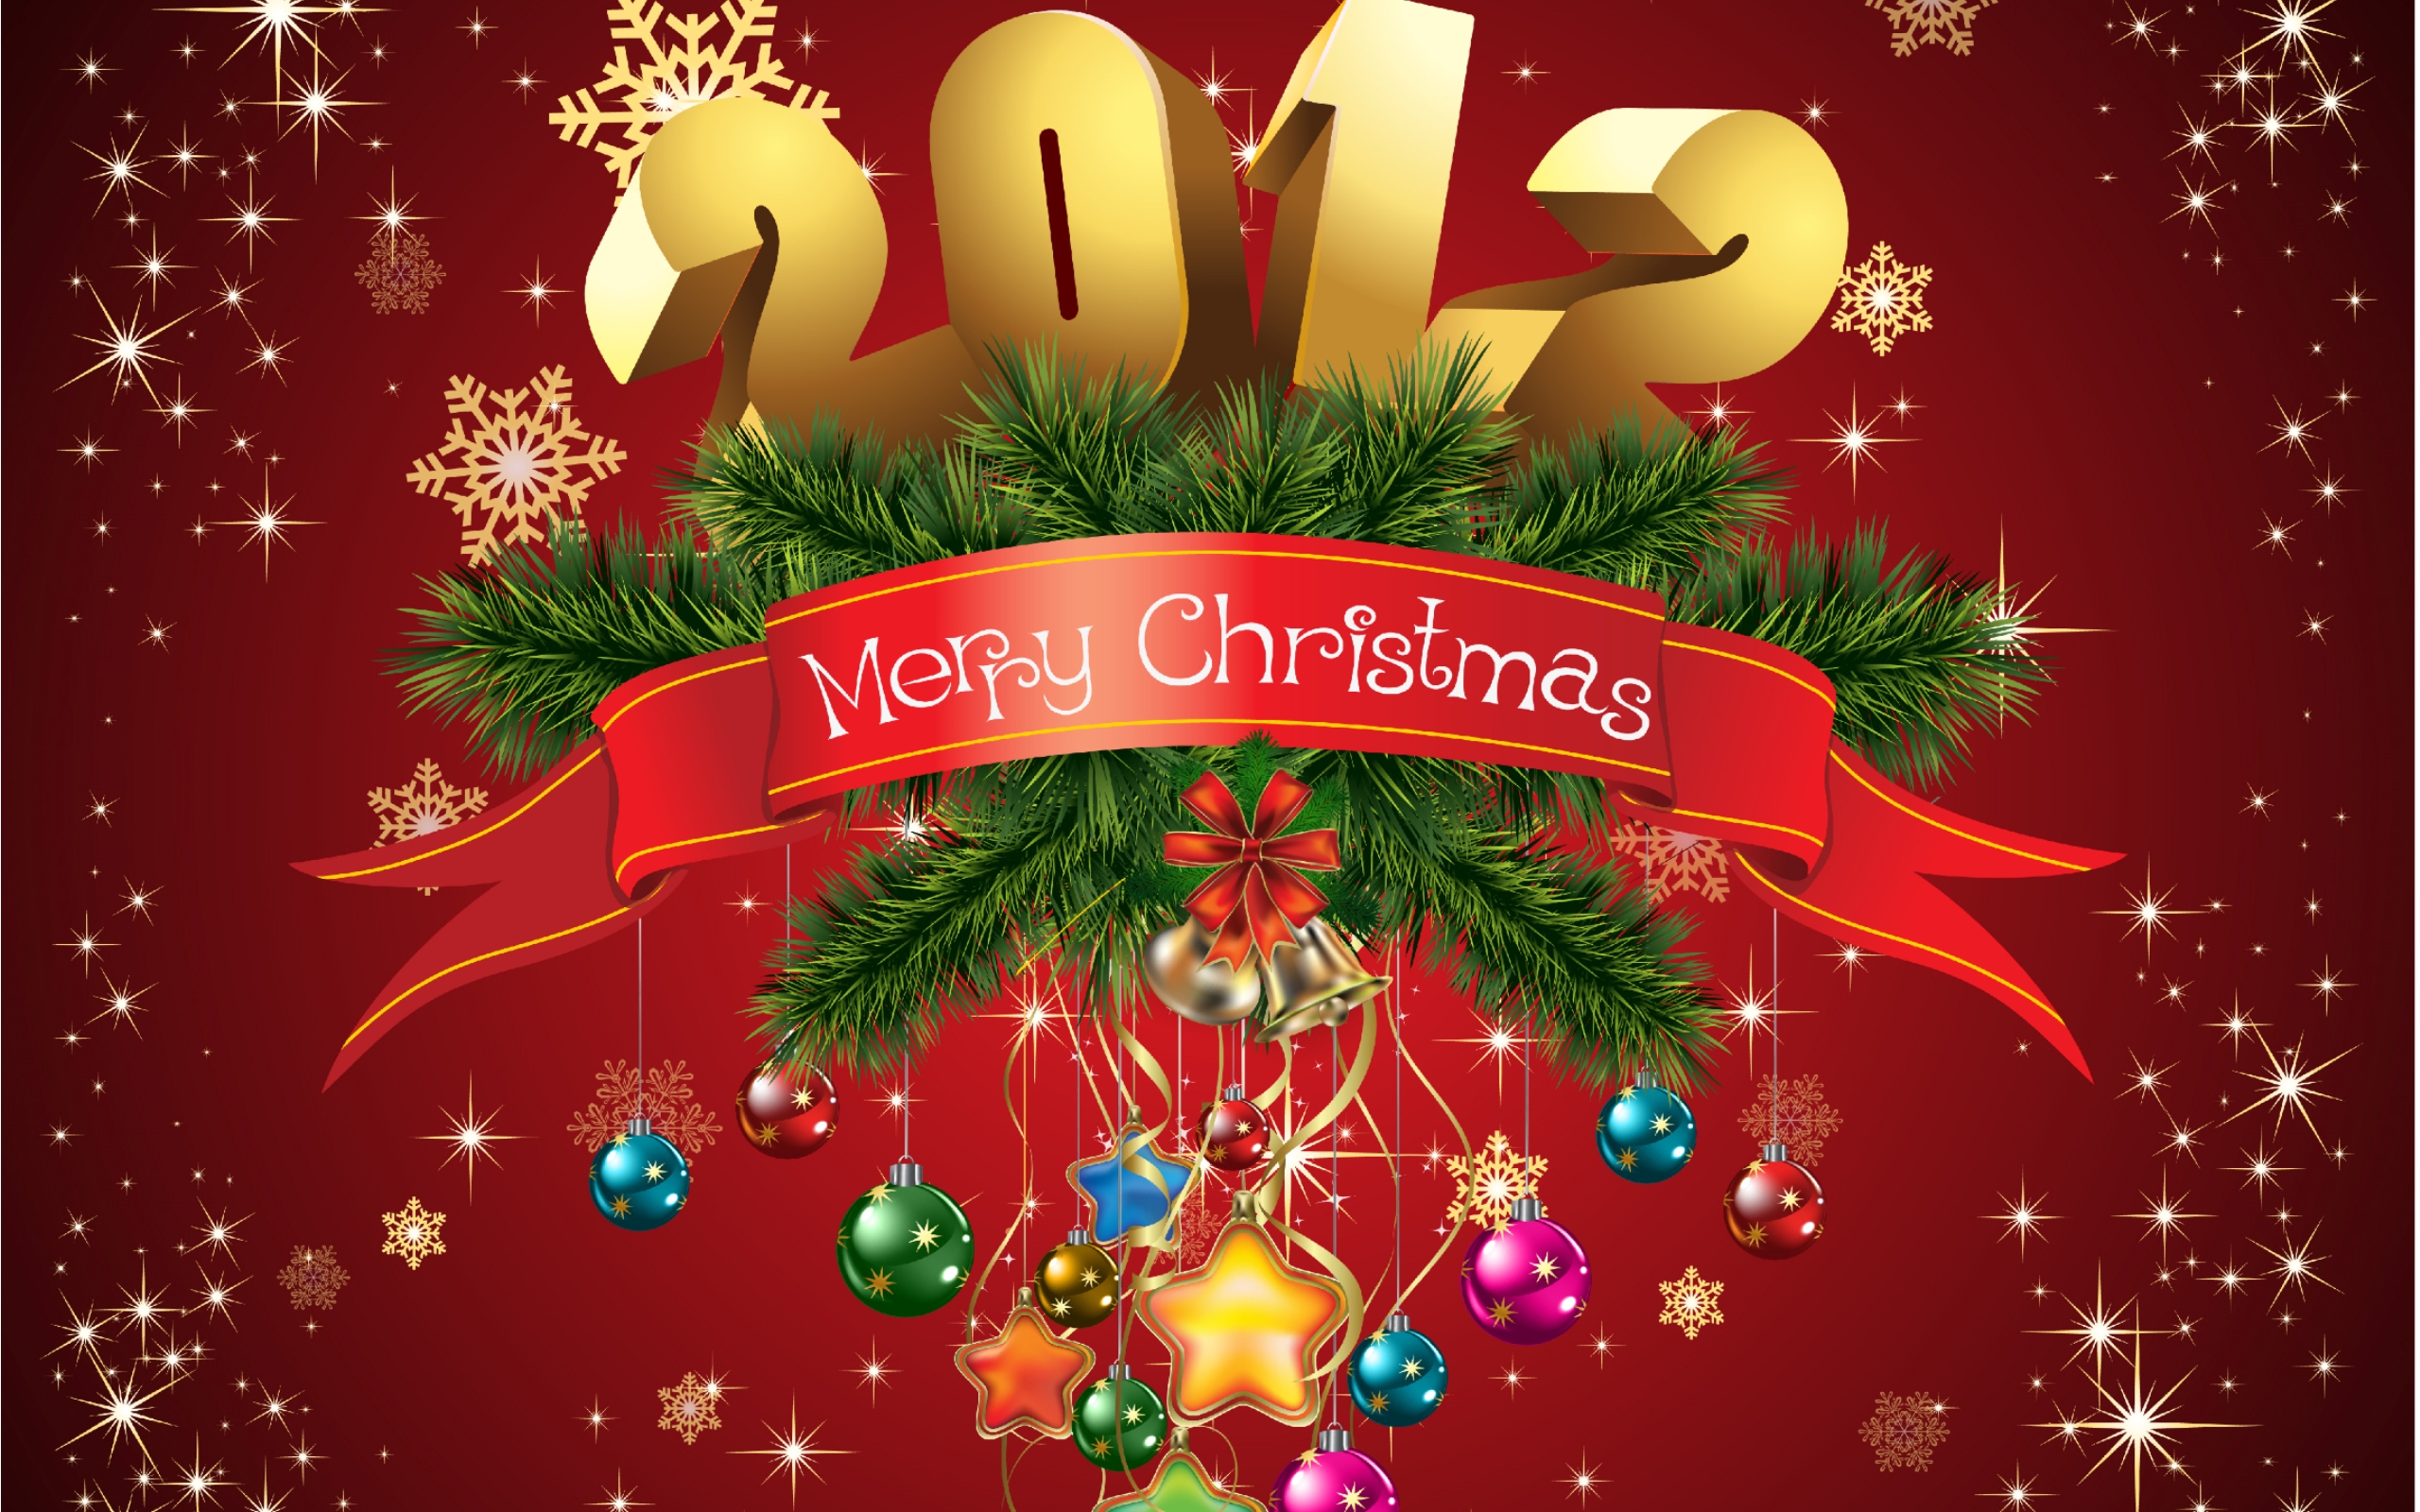 Merry Christmas 2012 for 2560 x 1600 widescreen resolution